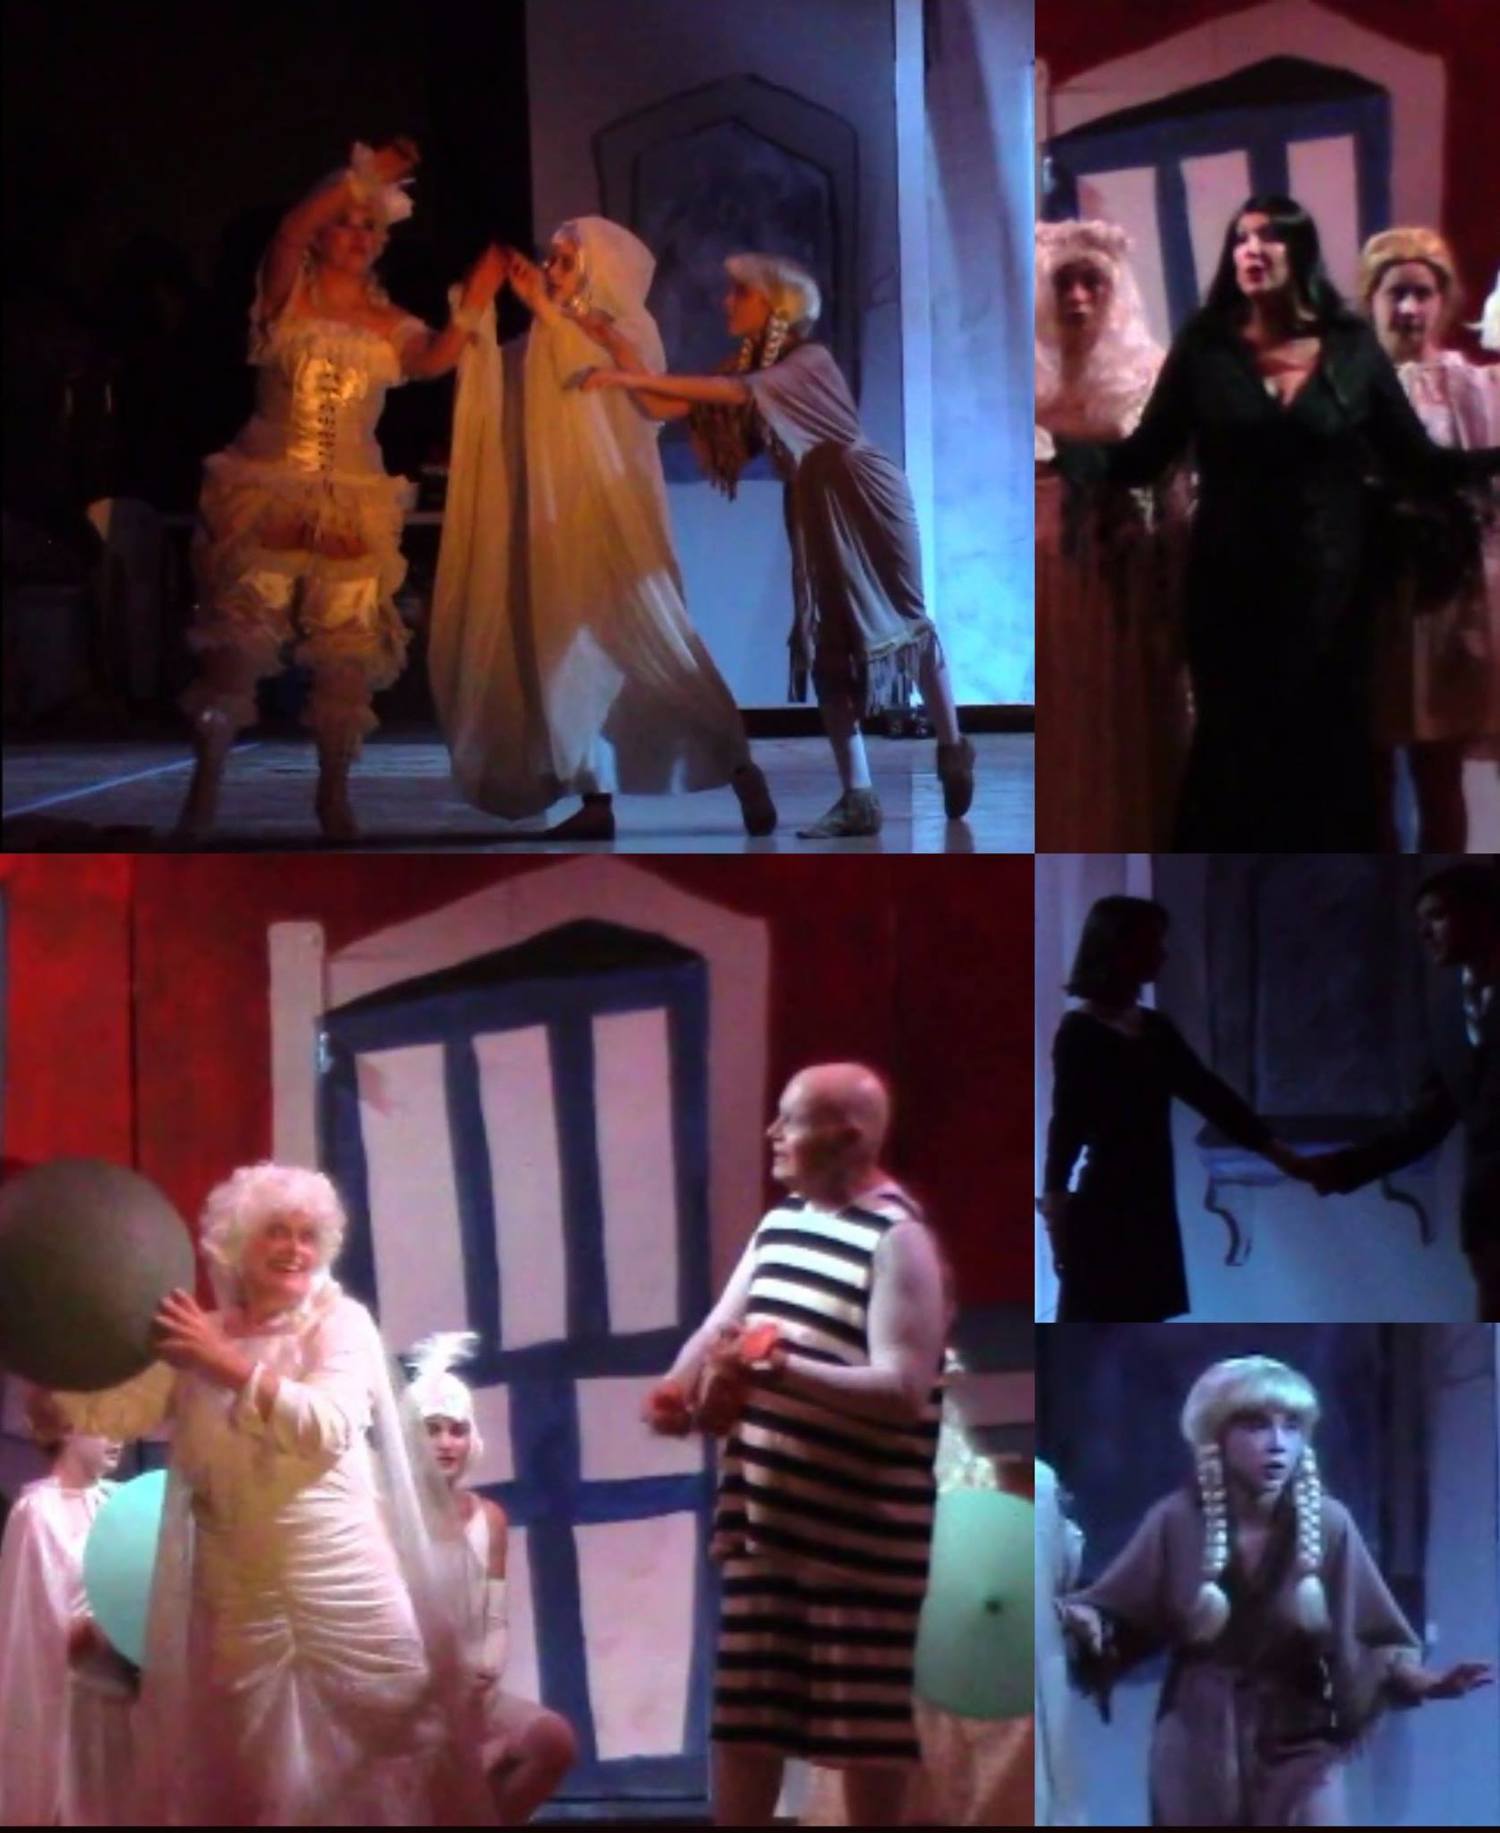 Clockwise from Upper Left:
1. Melony Floyd (the Courtesan), Hannah Kindstrom (Ophelia), and Courtney Benedict (Native American)
2. Kayla Smith (the Bride), Lee Anne Jackson (Morticia), and Cate Jackson (the Warrior Princess)
3. Olivia Wolfe (Wednesday) and John-Carl Laidler (Lucas)
4. Courtney Benedict (the Native American)
5. Sue Howe (The Moon) and Bill Simpson (Uncle Fester)